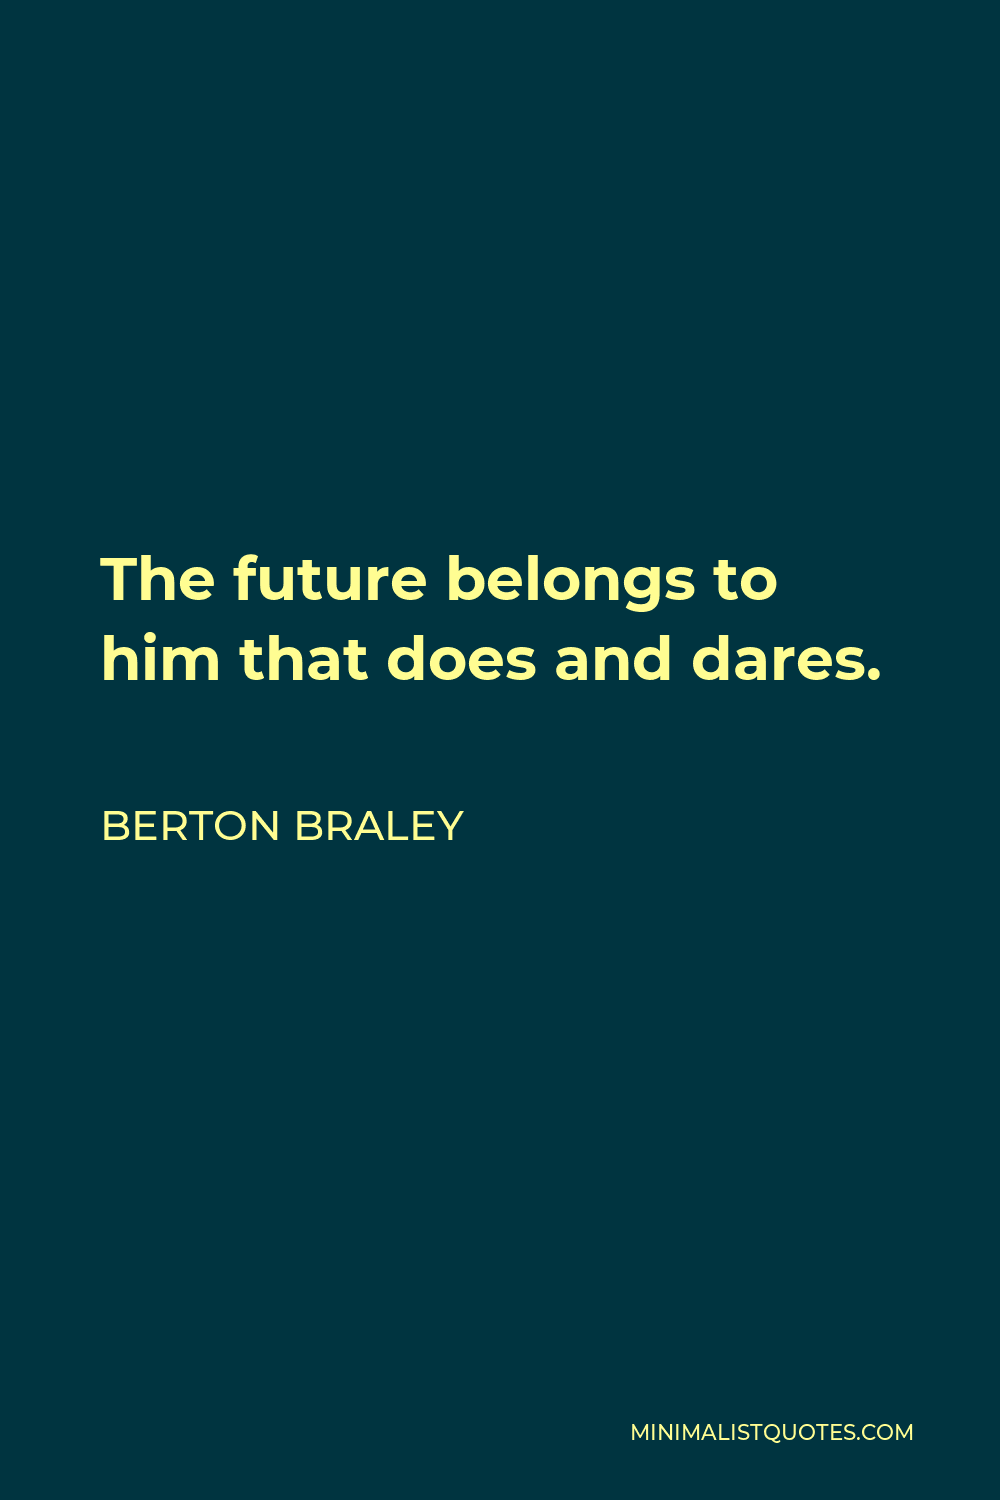 Berton Braley Quote - The future belongs to him that does and dares.